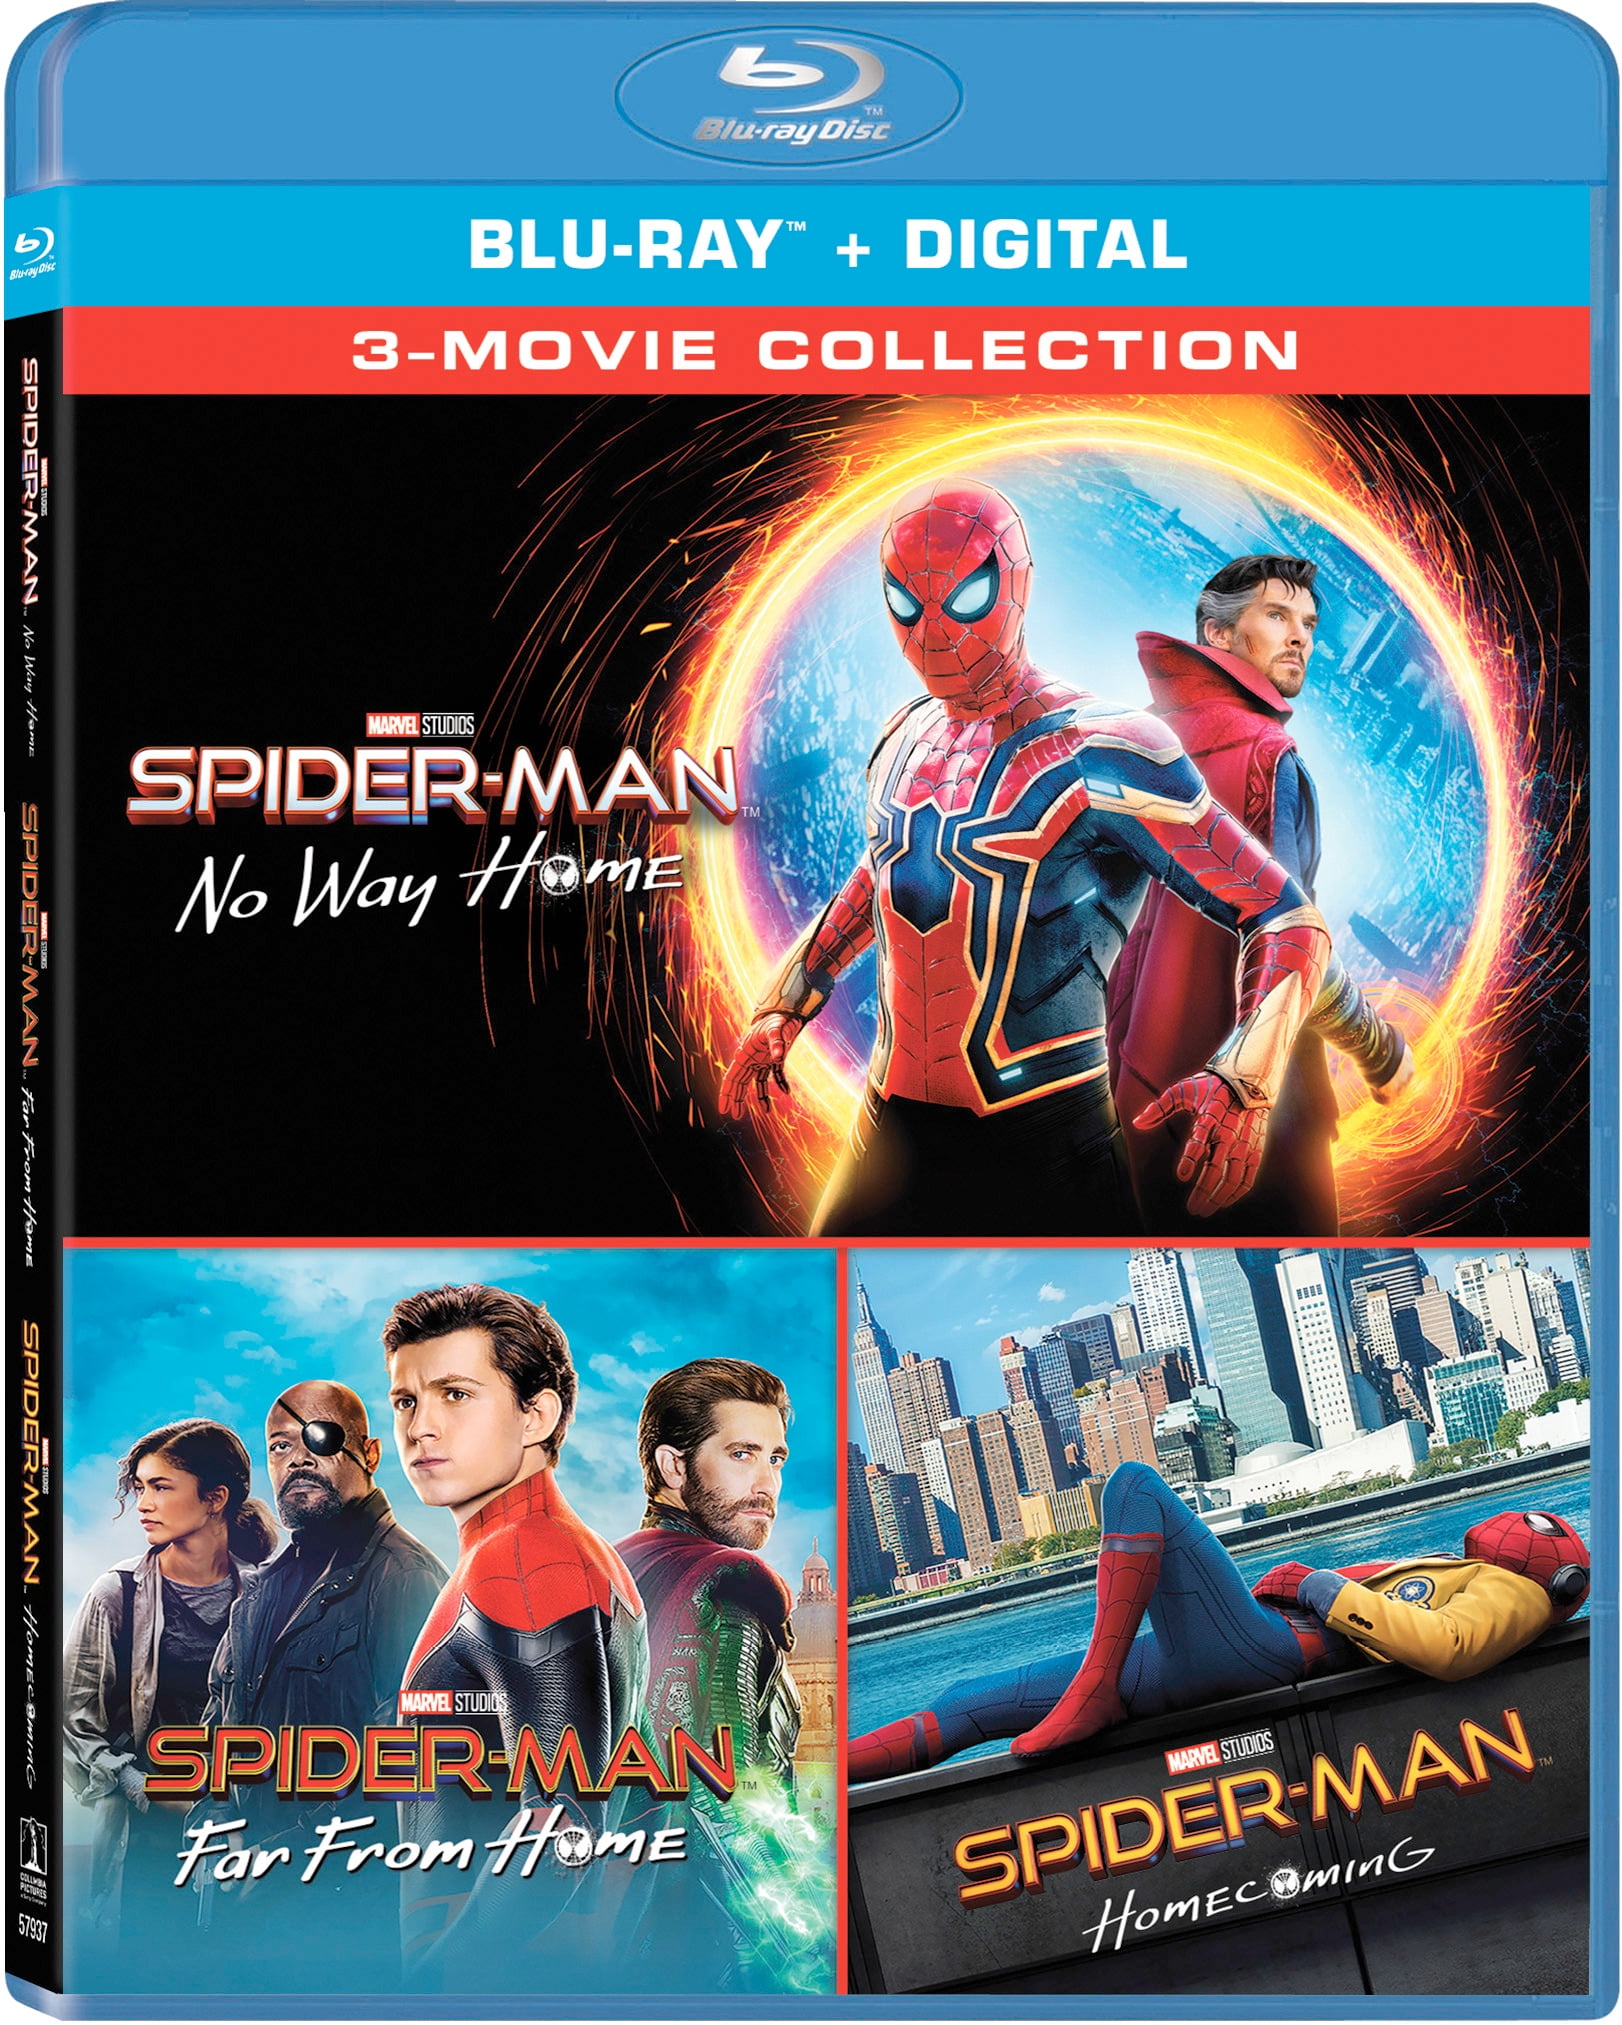 SPHE Spider-Man: Far From Home / Spider-Man: Homecoming / Spider-Man: No Way Home (Blu-ray)